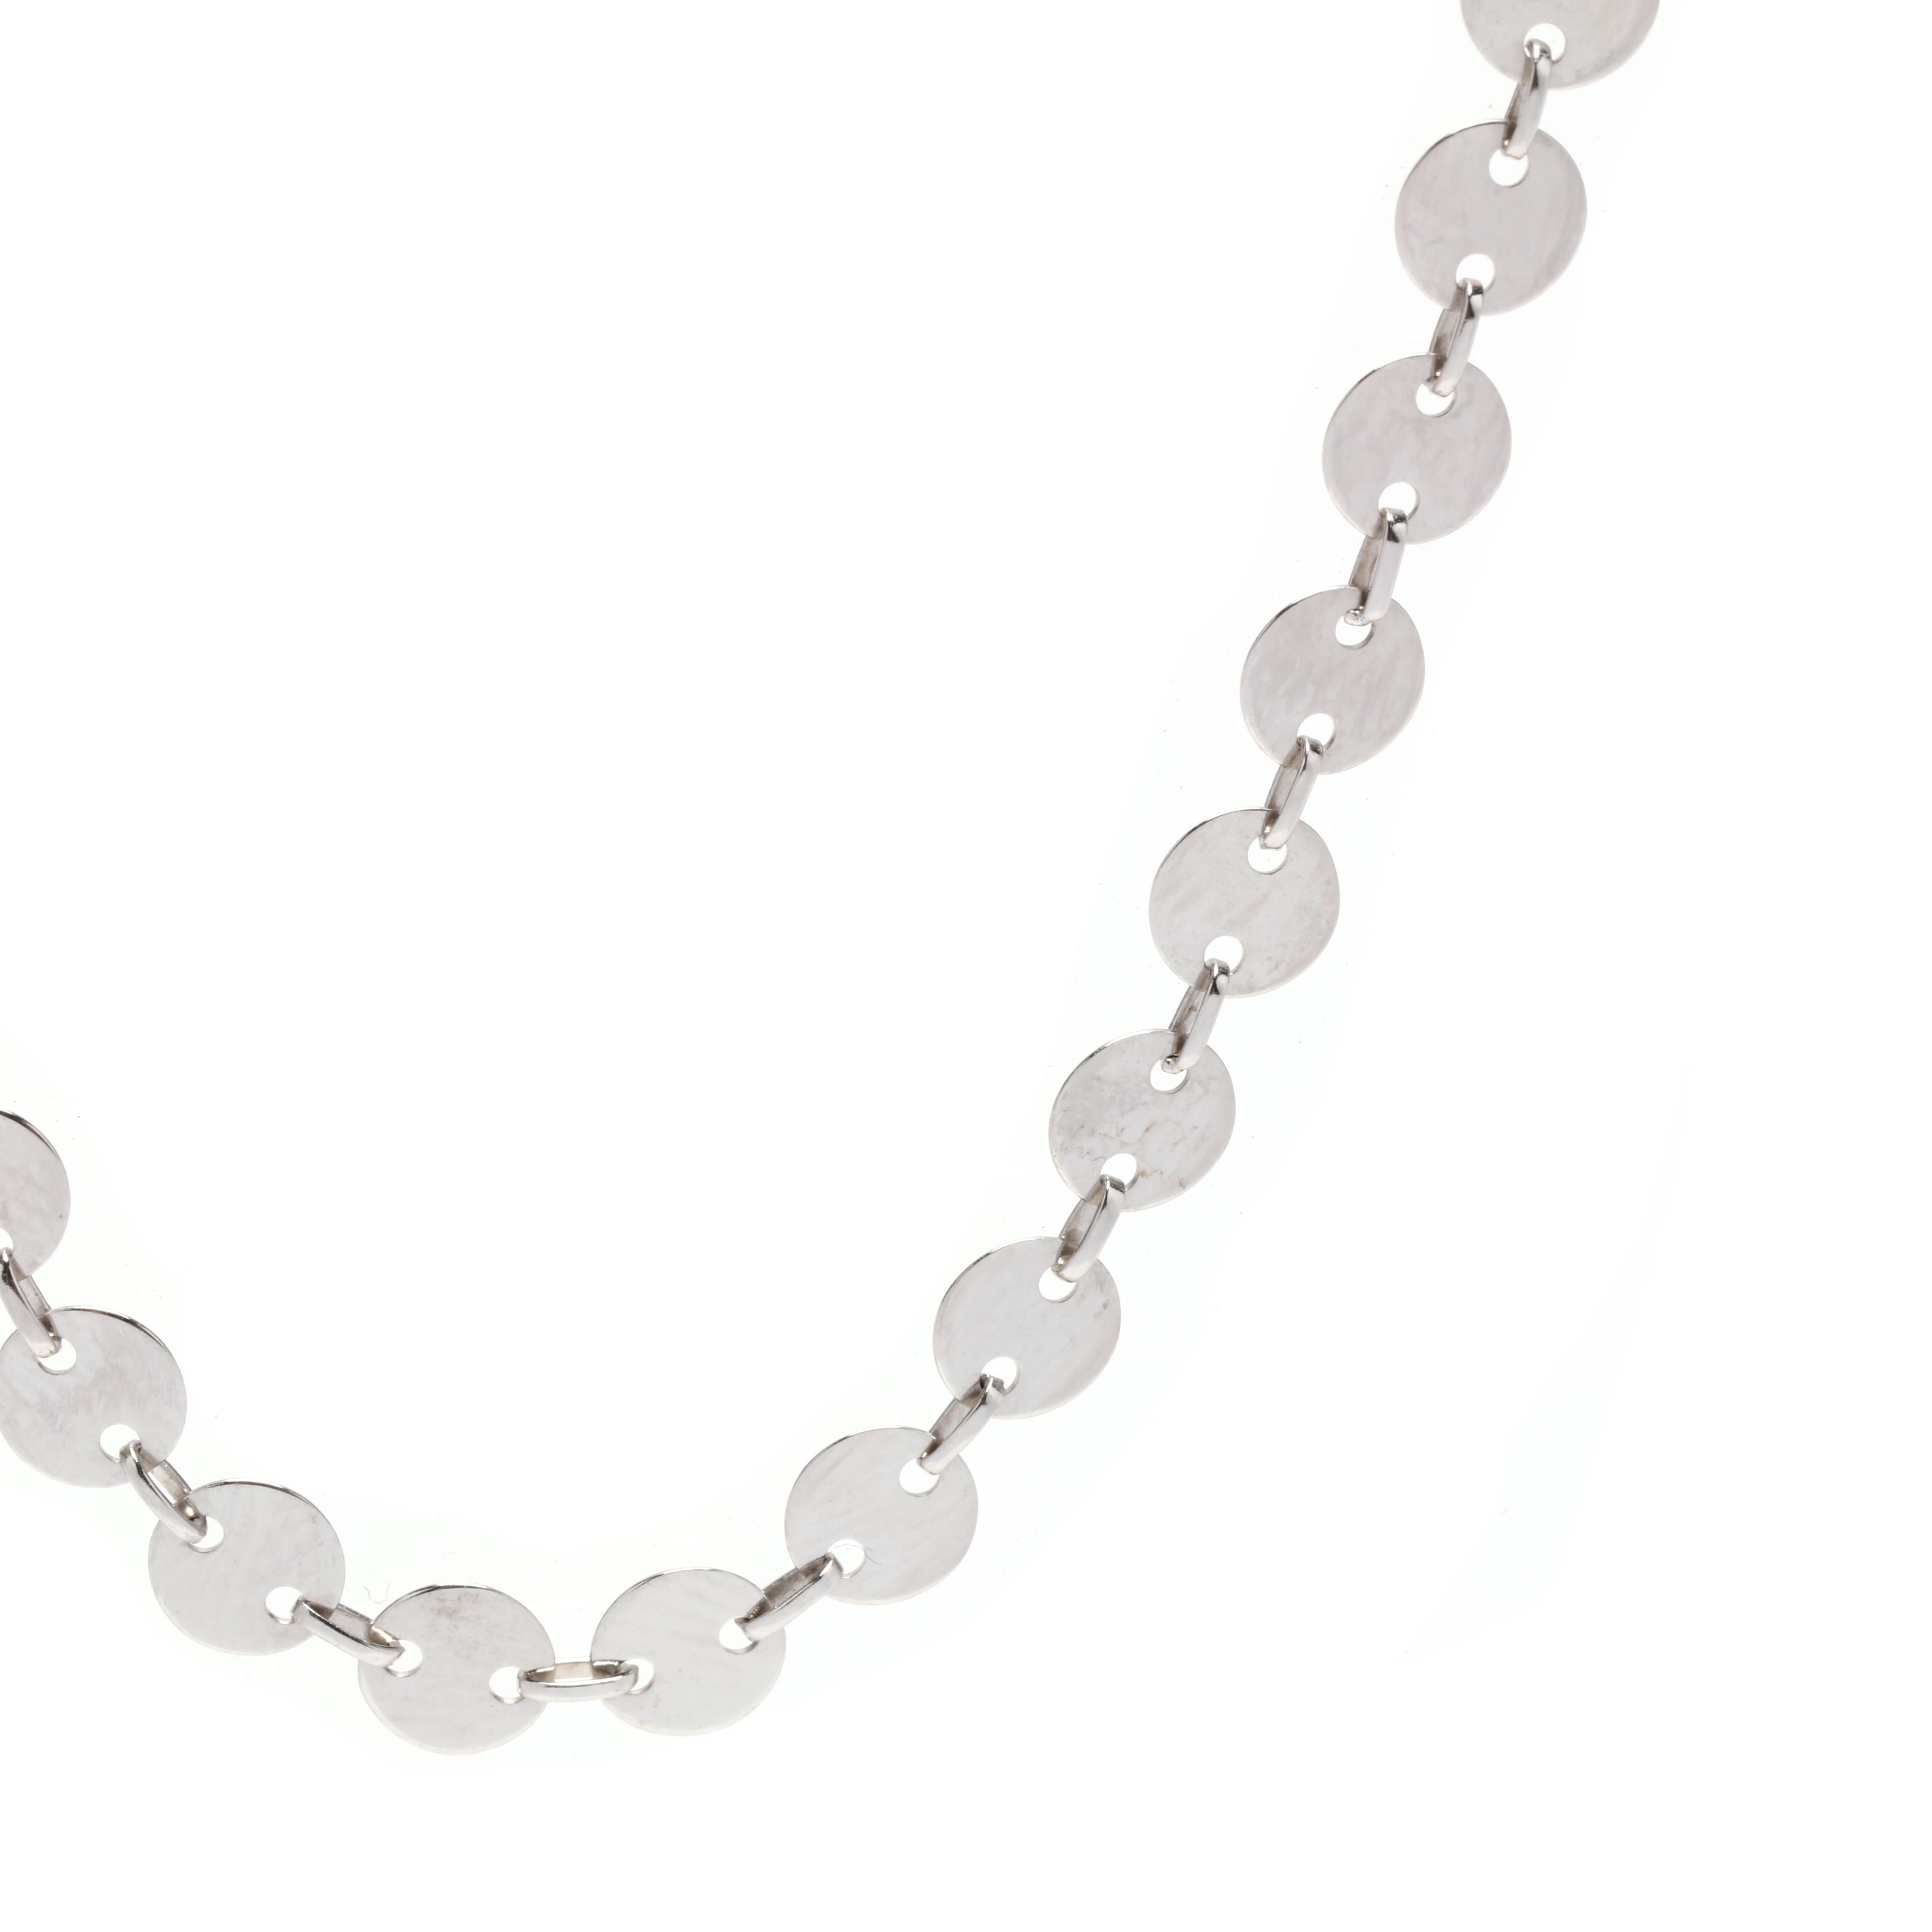 A 14 karat white gold flat round mirror link chain necklace. This adjustable fancy chain features alternating flat round mirror links with thin oval links and with a lobster clasp.

Length: 17.75 - 19.75 in. (adjustable)

Width: 5 mm

Weight: 3.6